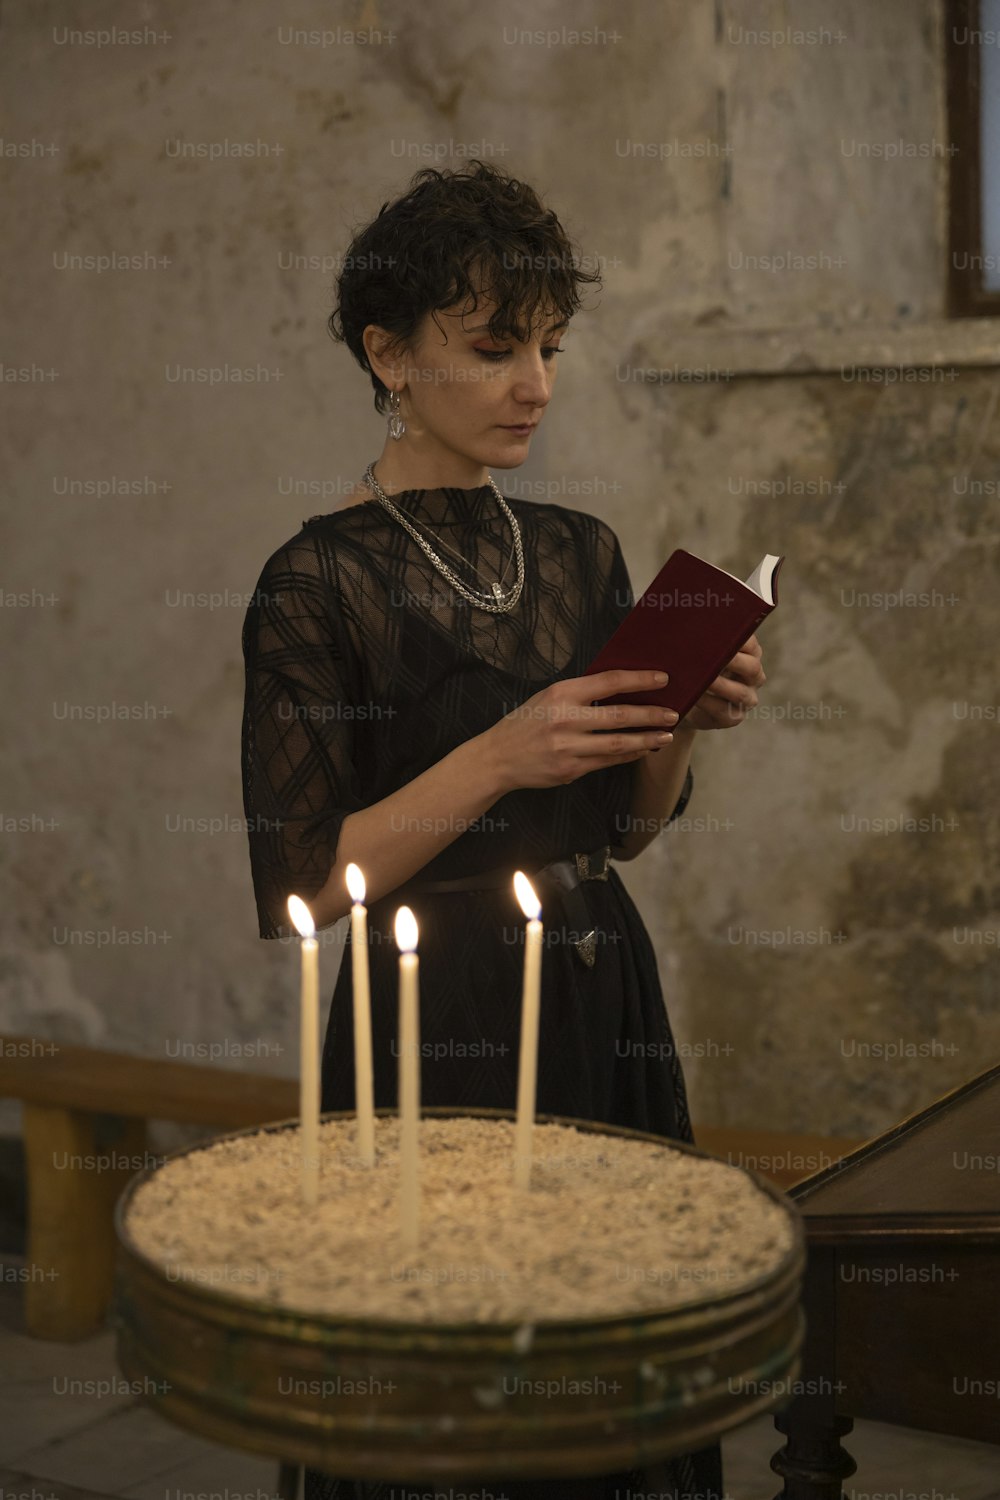 a woman standing in front of a cake with candles